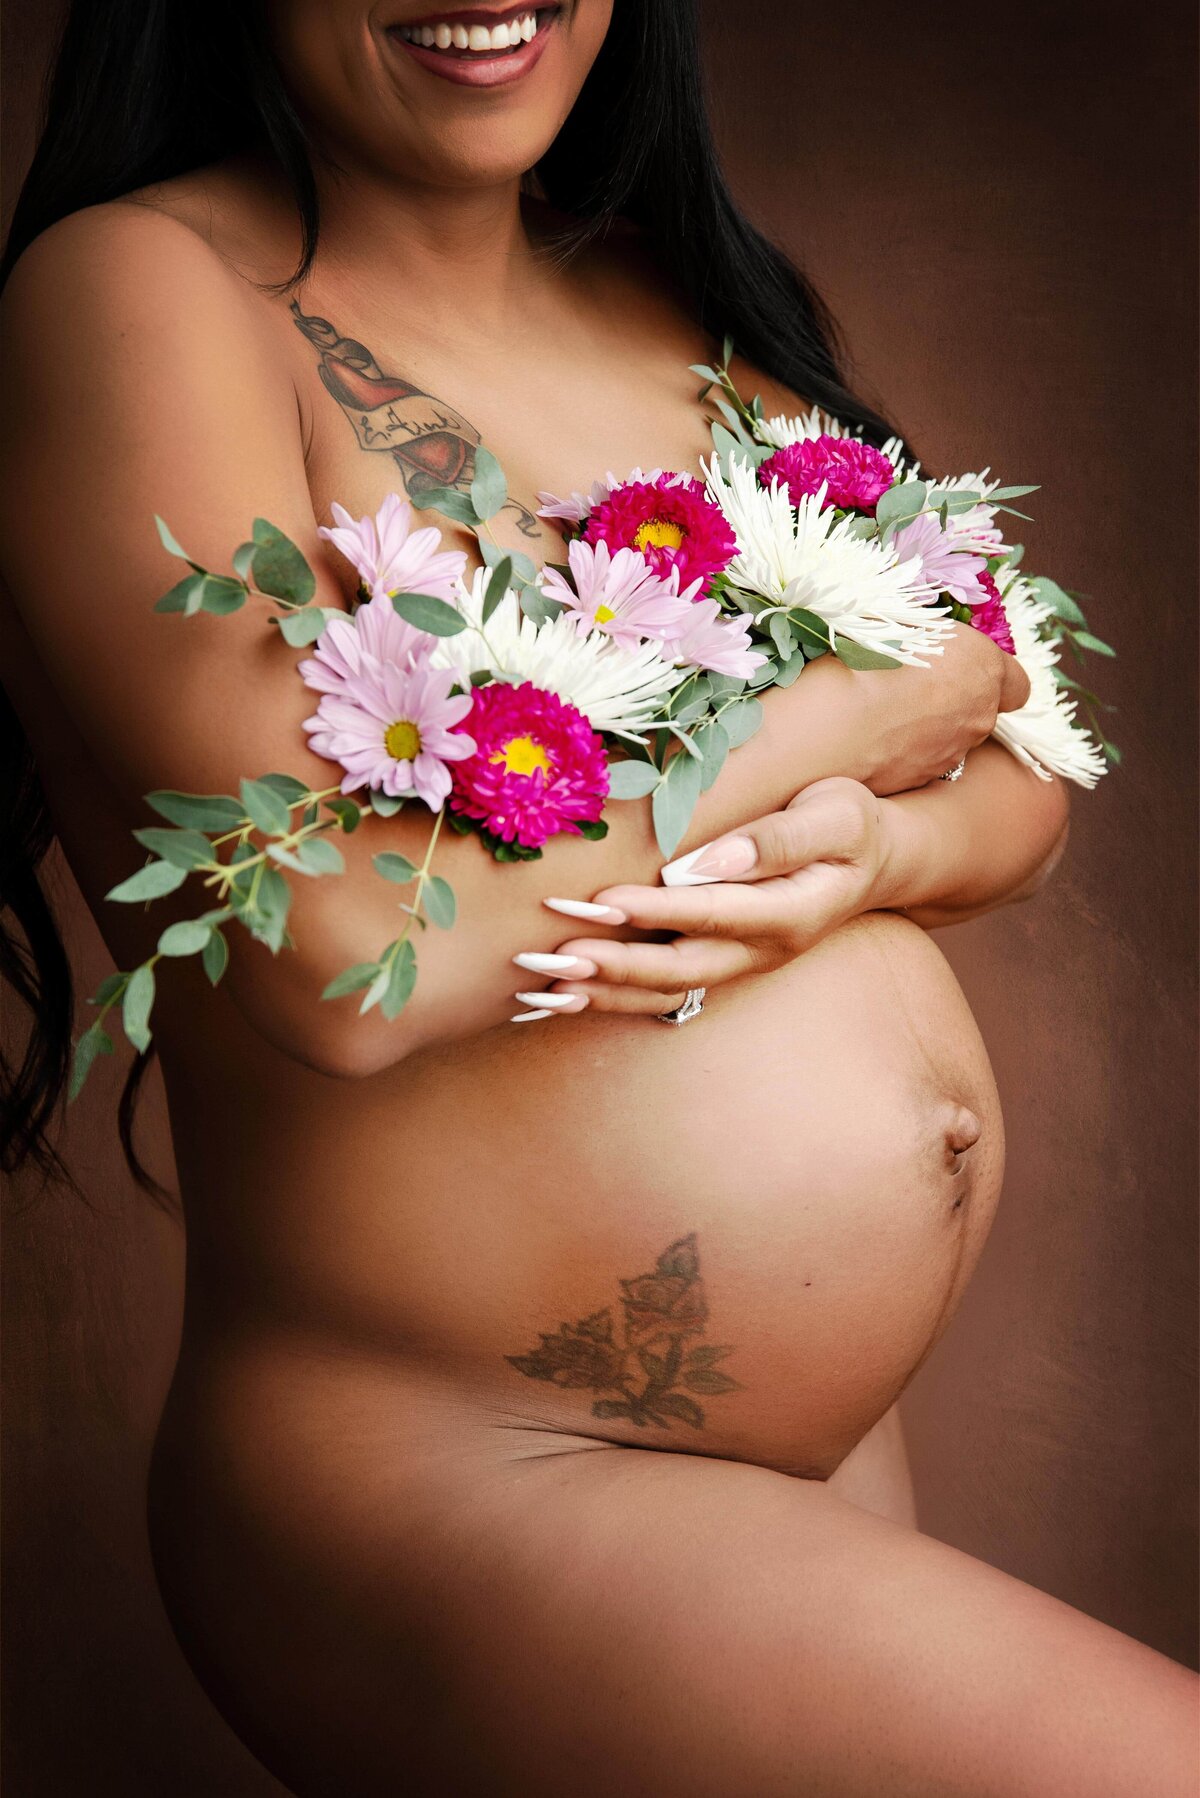 st-louis-maternity-photographer-close-up-of-pregnant-mom-holding-flowers